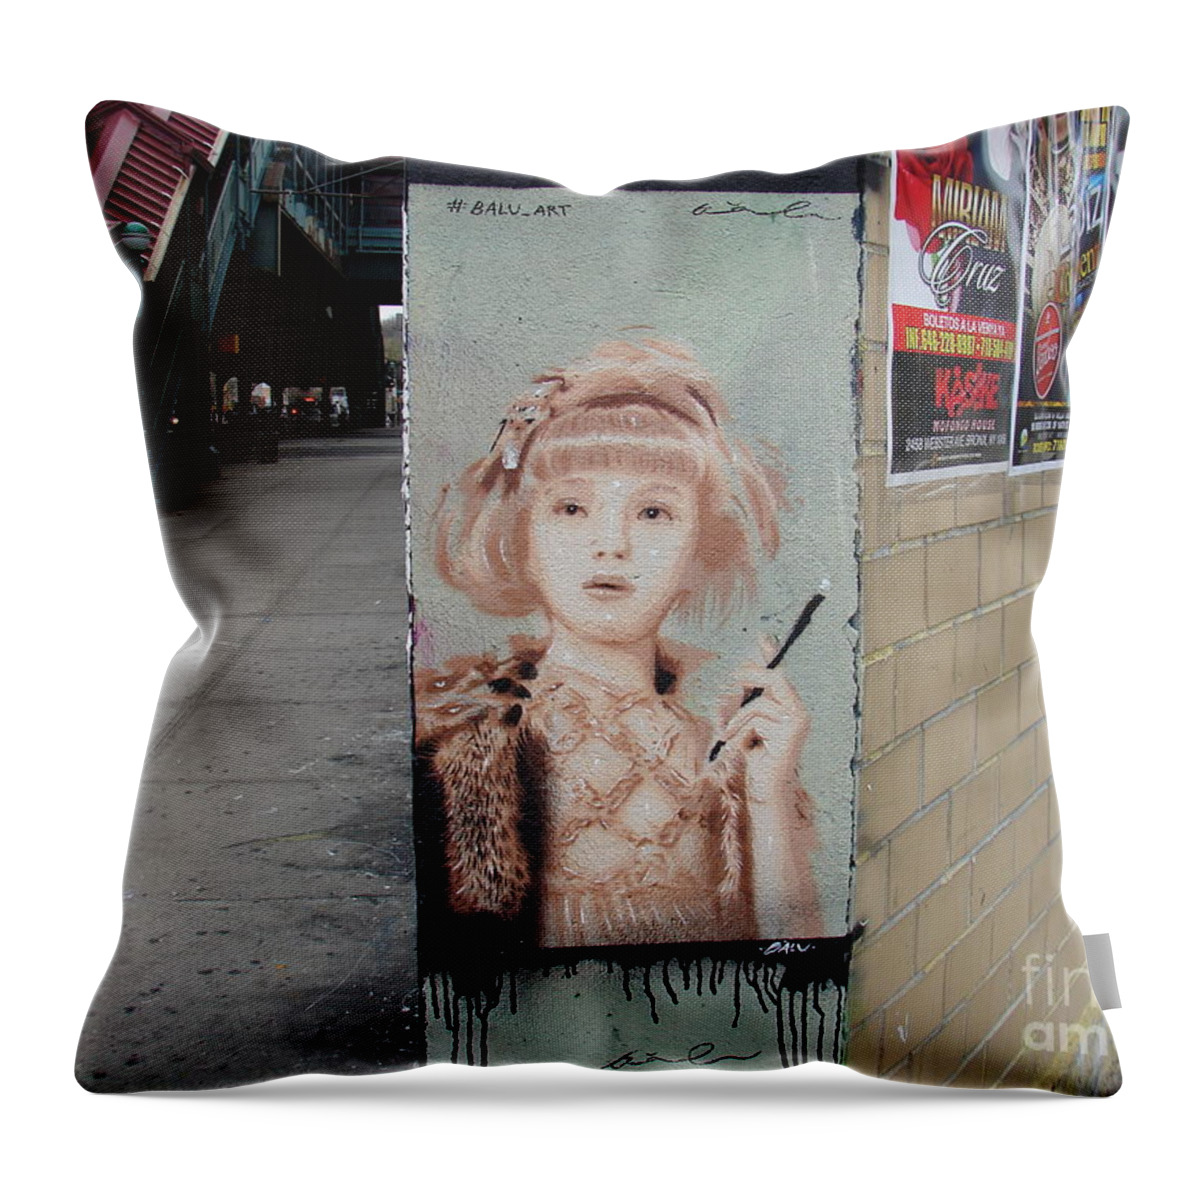 Graffiti Throw Pillow featuring the photograph Smoking Girl by Cole Thompson